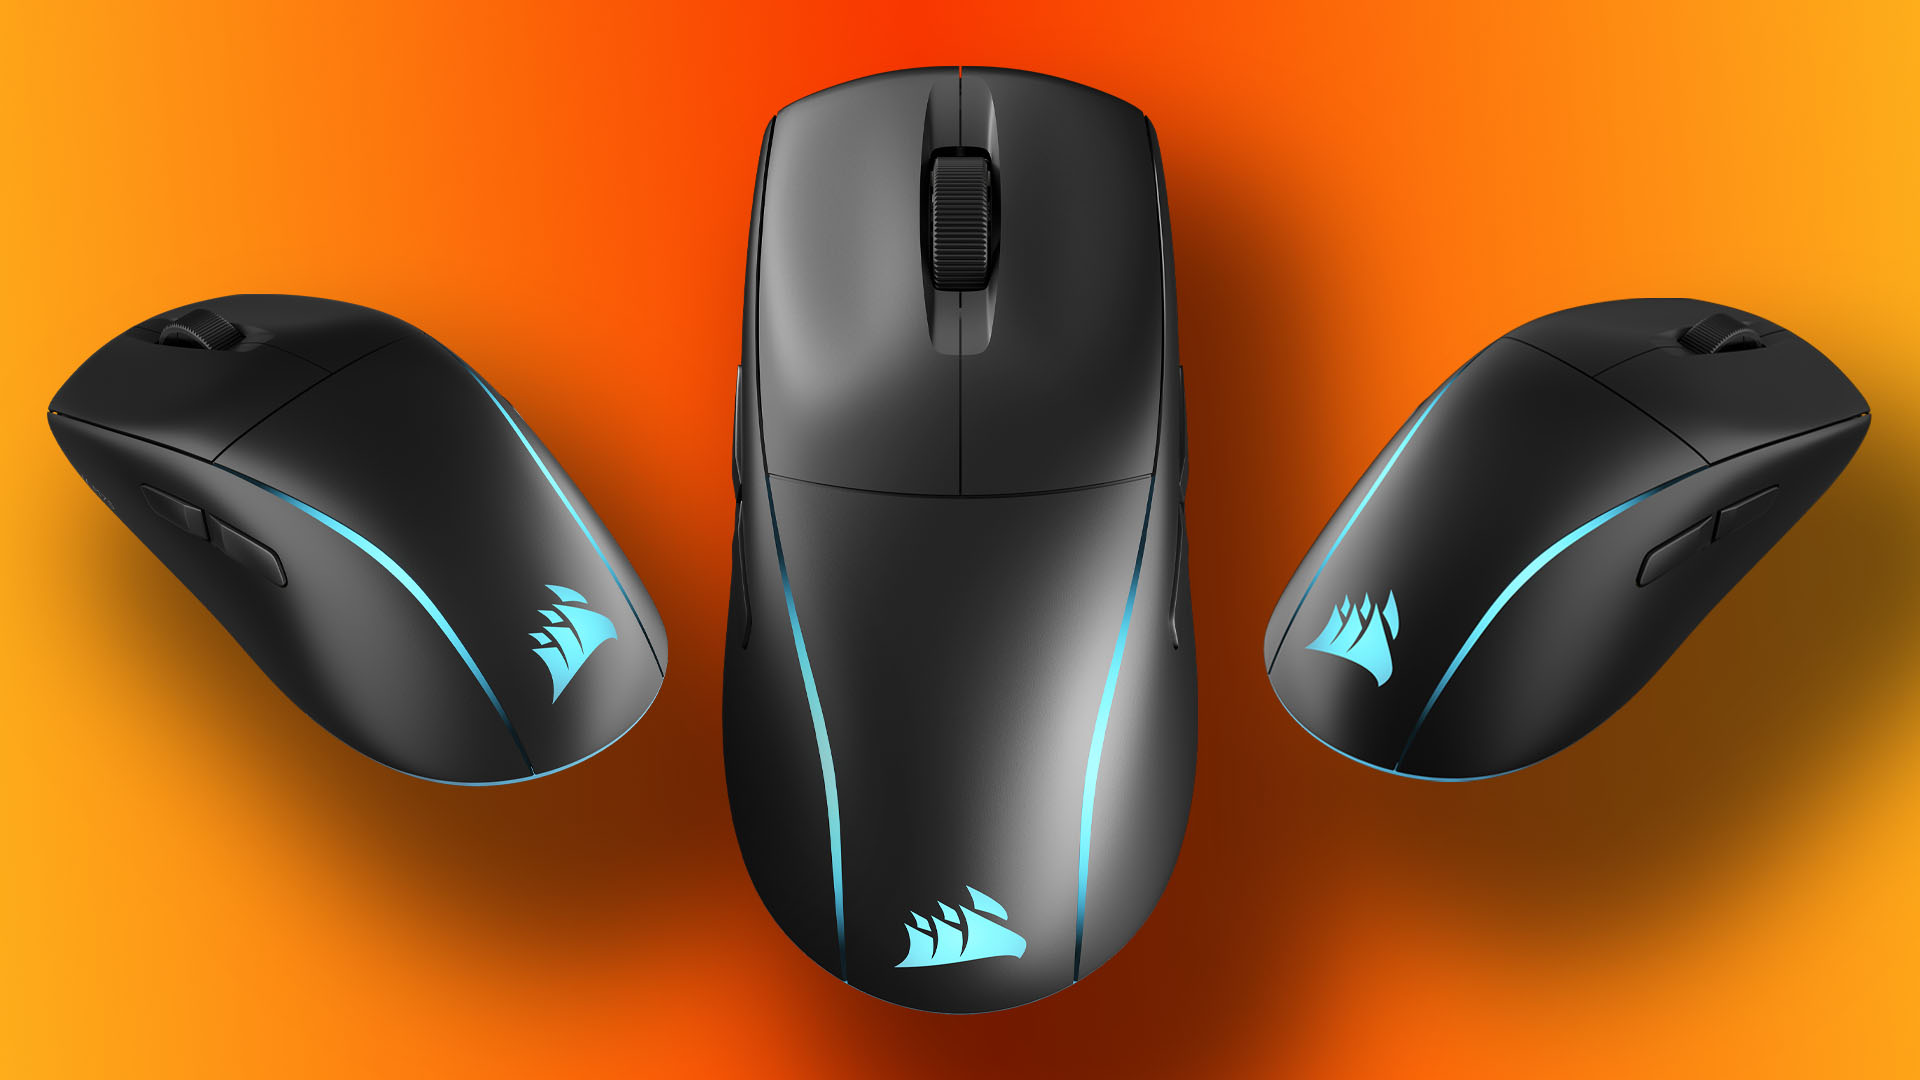 Save $40 on this Corsair M75 Wireless gaming mouse, if you're quick